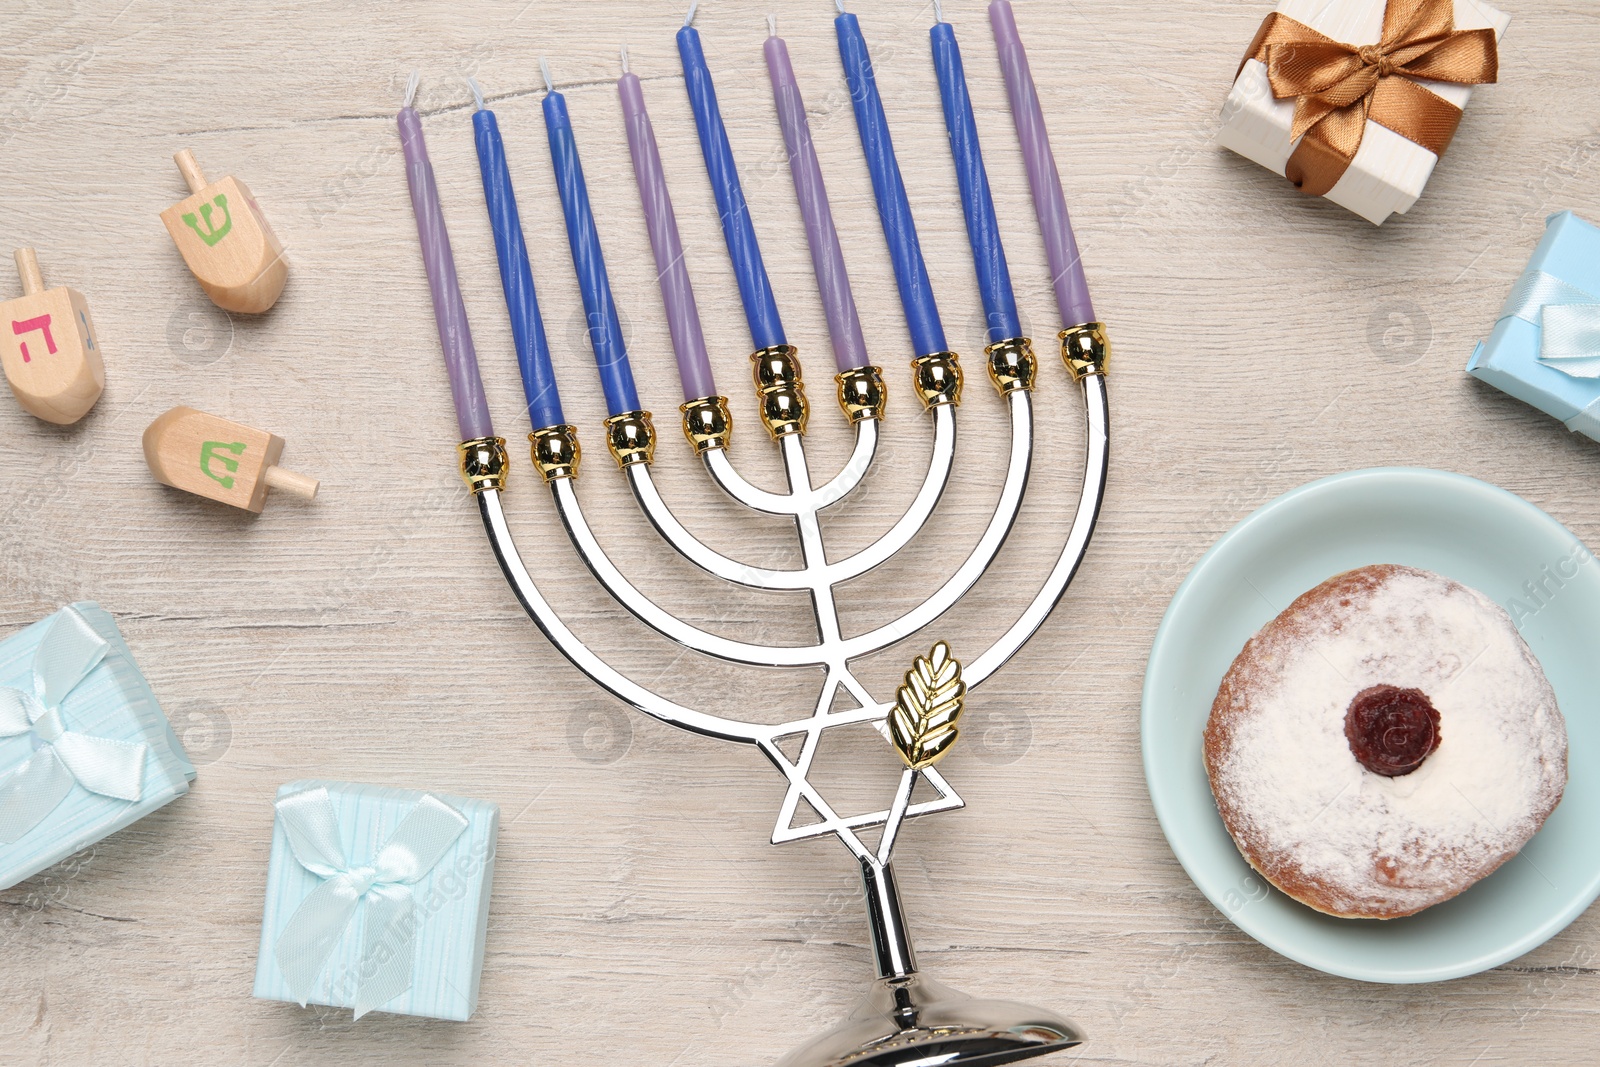 Photo of Flat lay composition with Hanukkah menorah and gift boxes on light wooden table